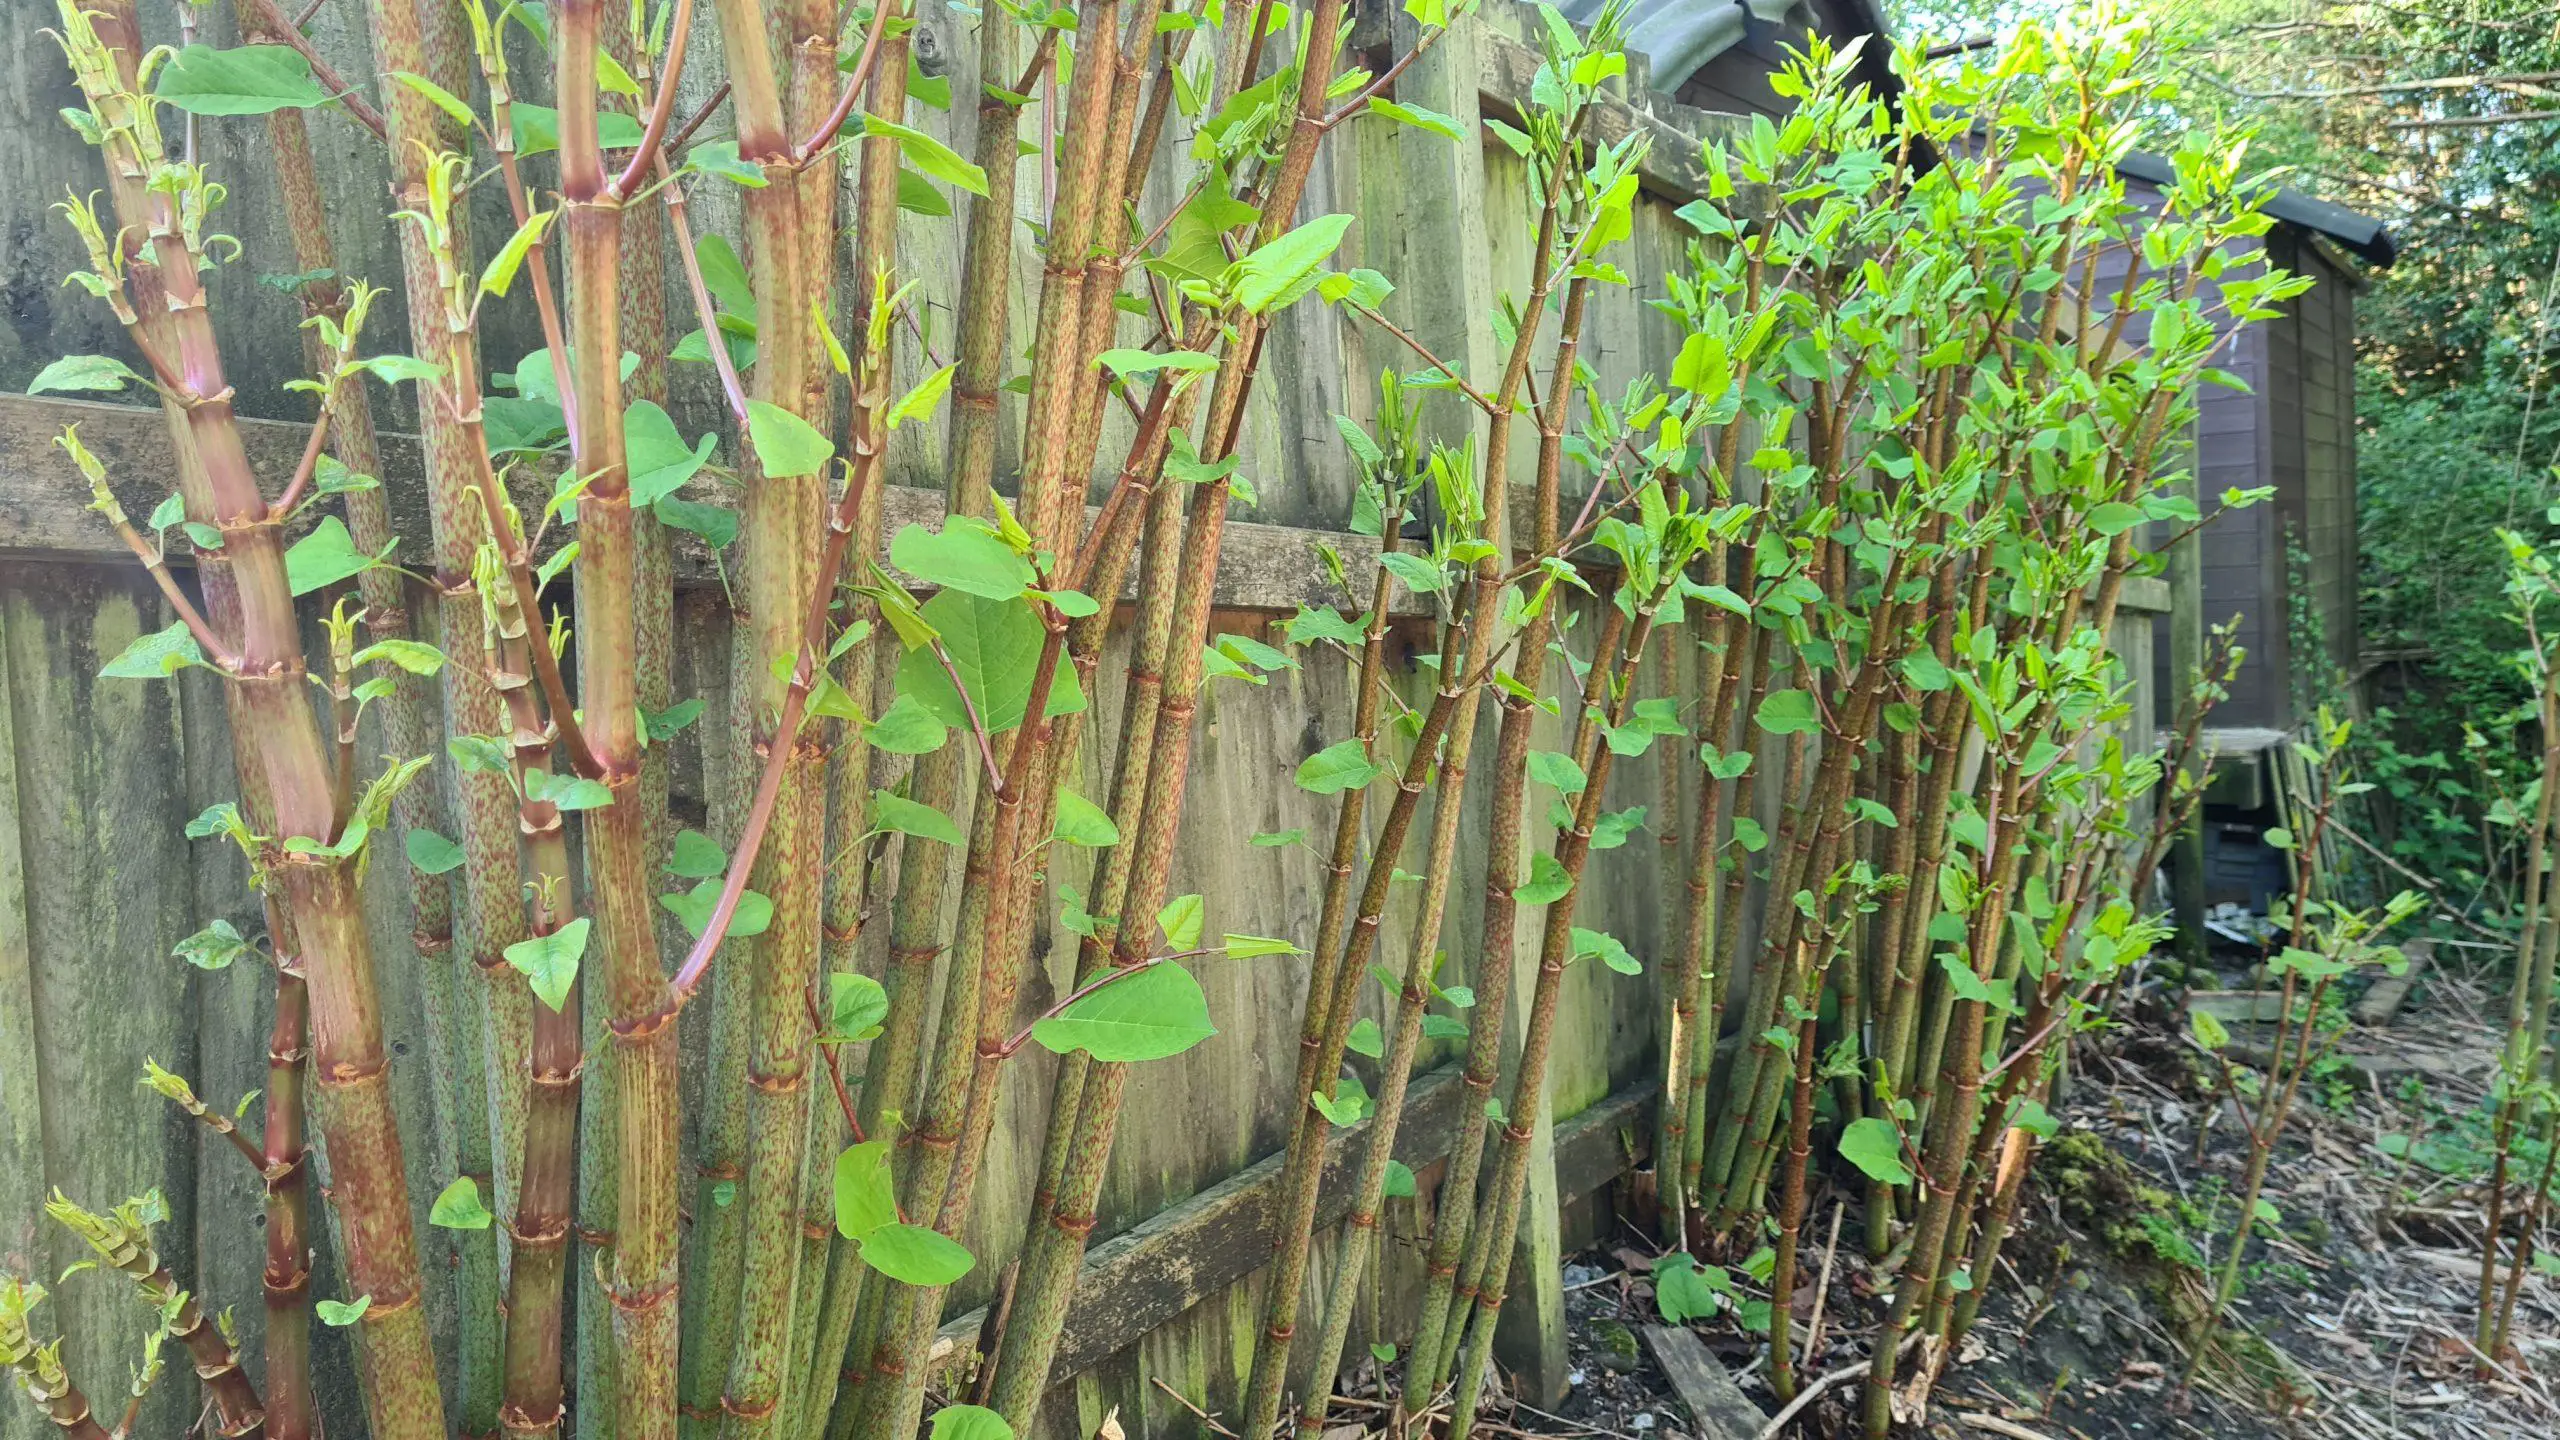 Japanese knotweed grows at an exceptional rate daily. Up to 10cm per day